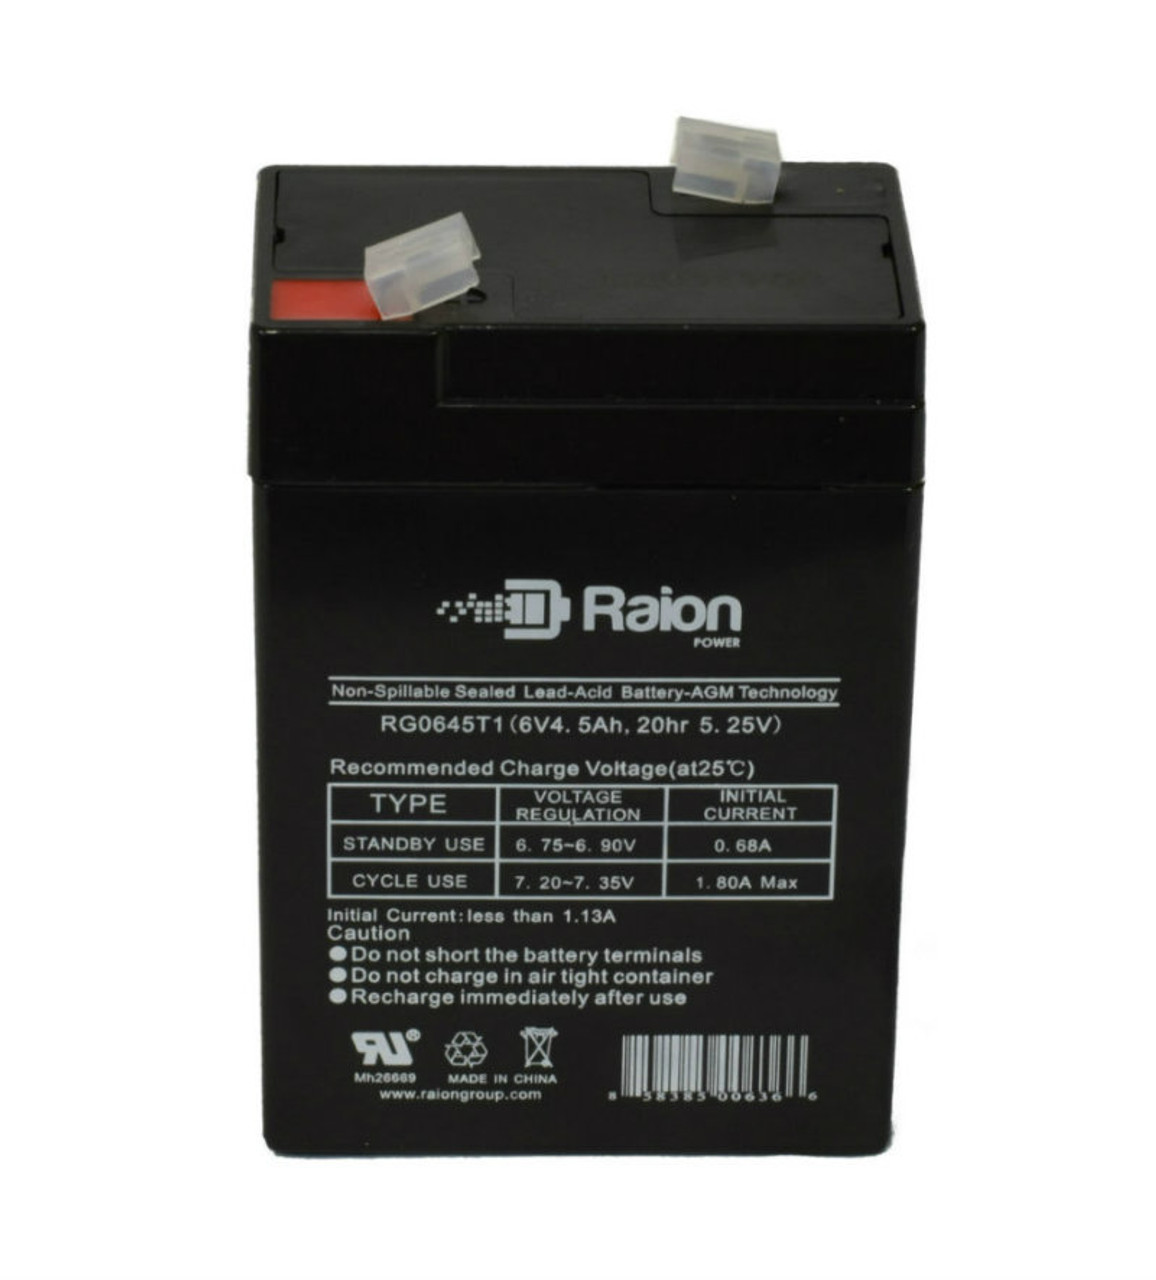 Raion Power RG0645T1 Replacement Battery Cartridge for Mule 6GC012E